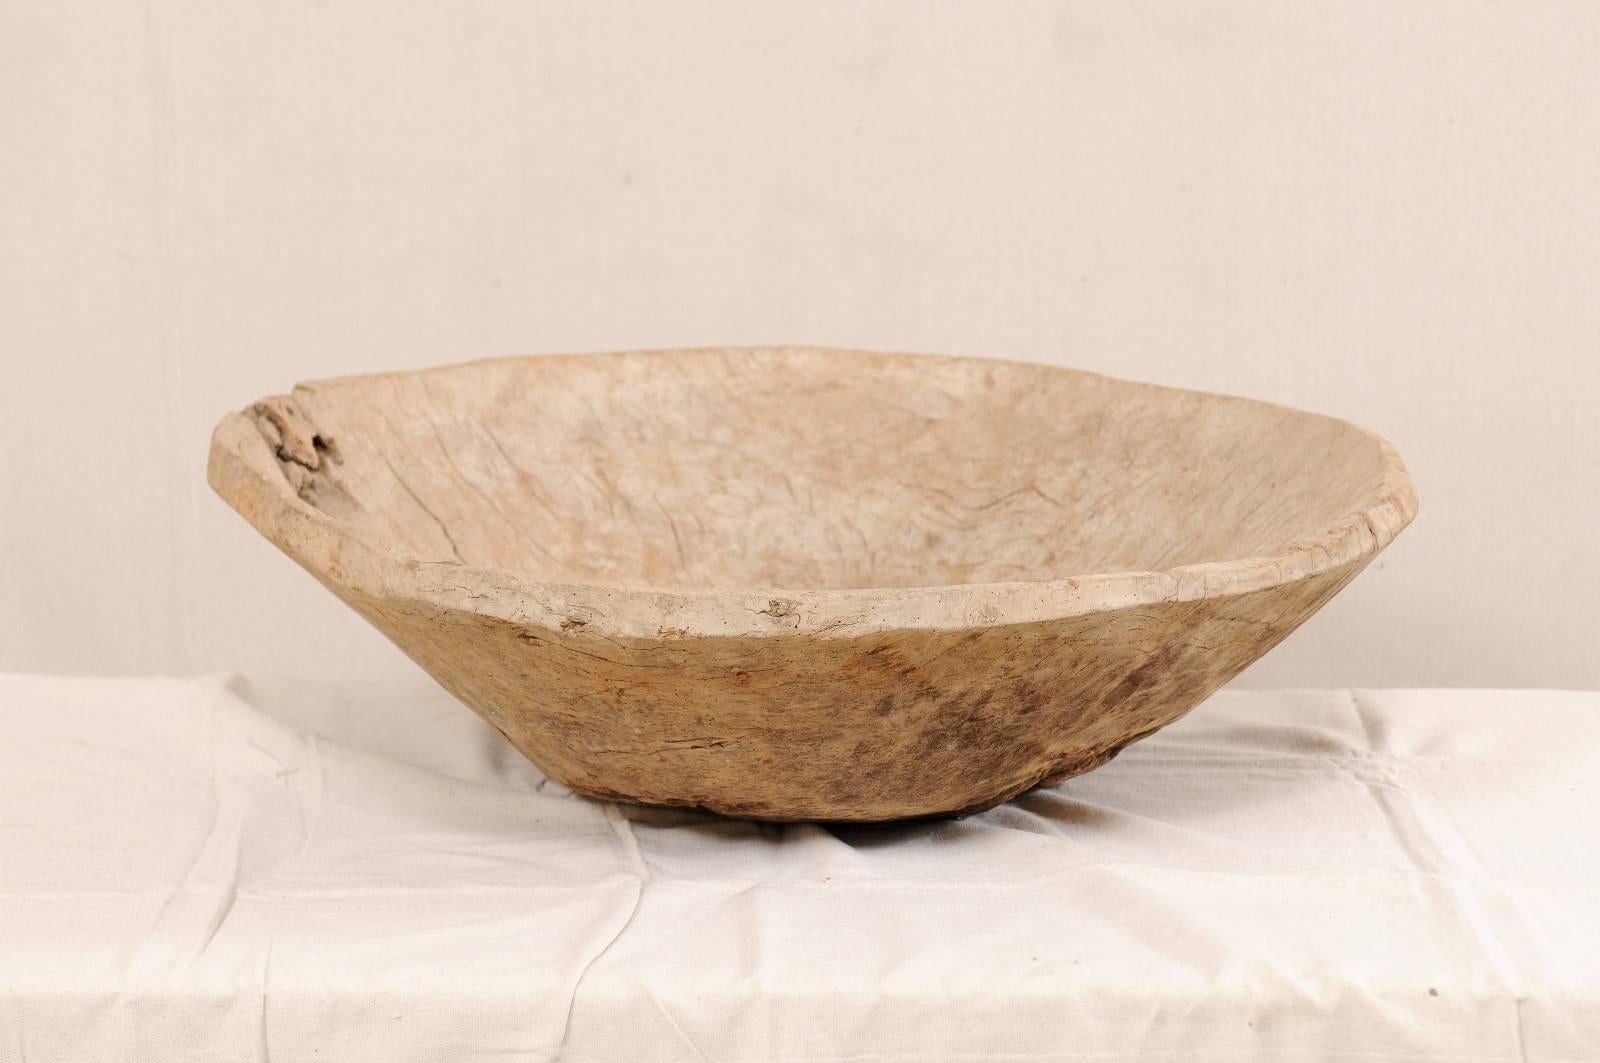 An antique European wood bowl. This beautiful wood bowl has been hand-carved from a single piece of burl wood. It is round in shape, with widest part being at the top lip and sloping down and inward towards the centre. The natural burl wood shows